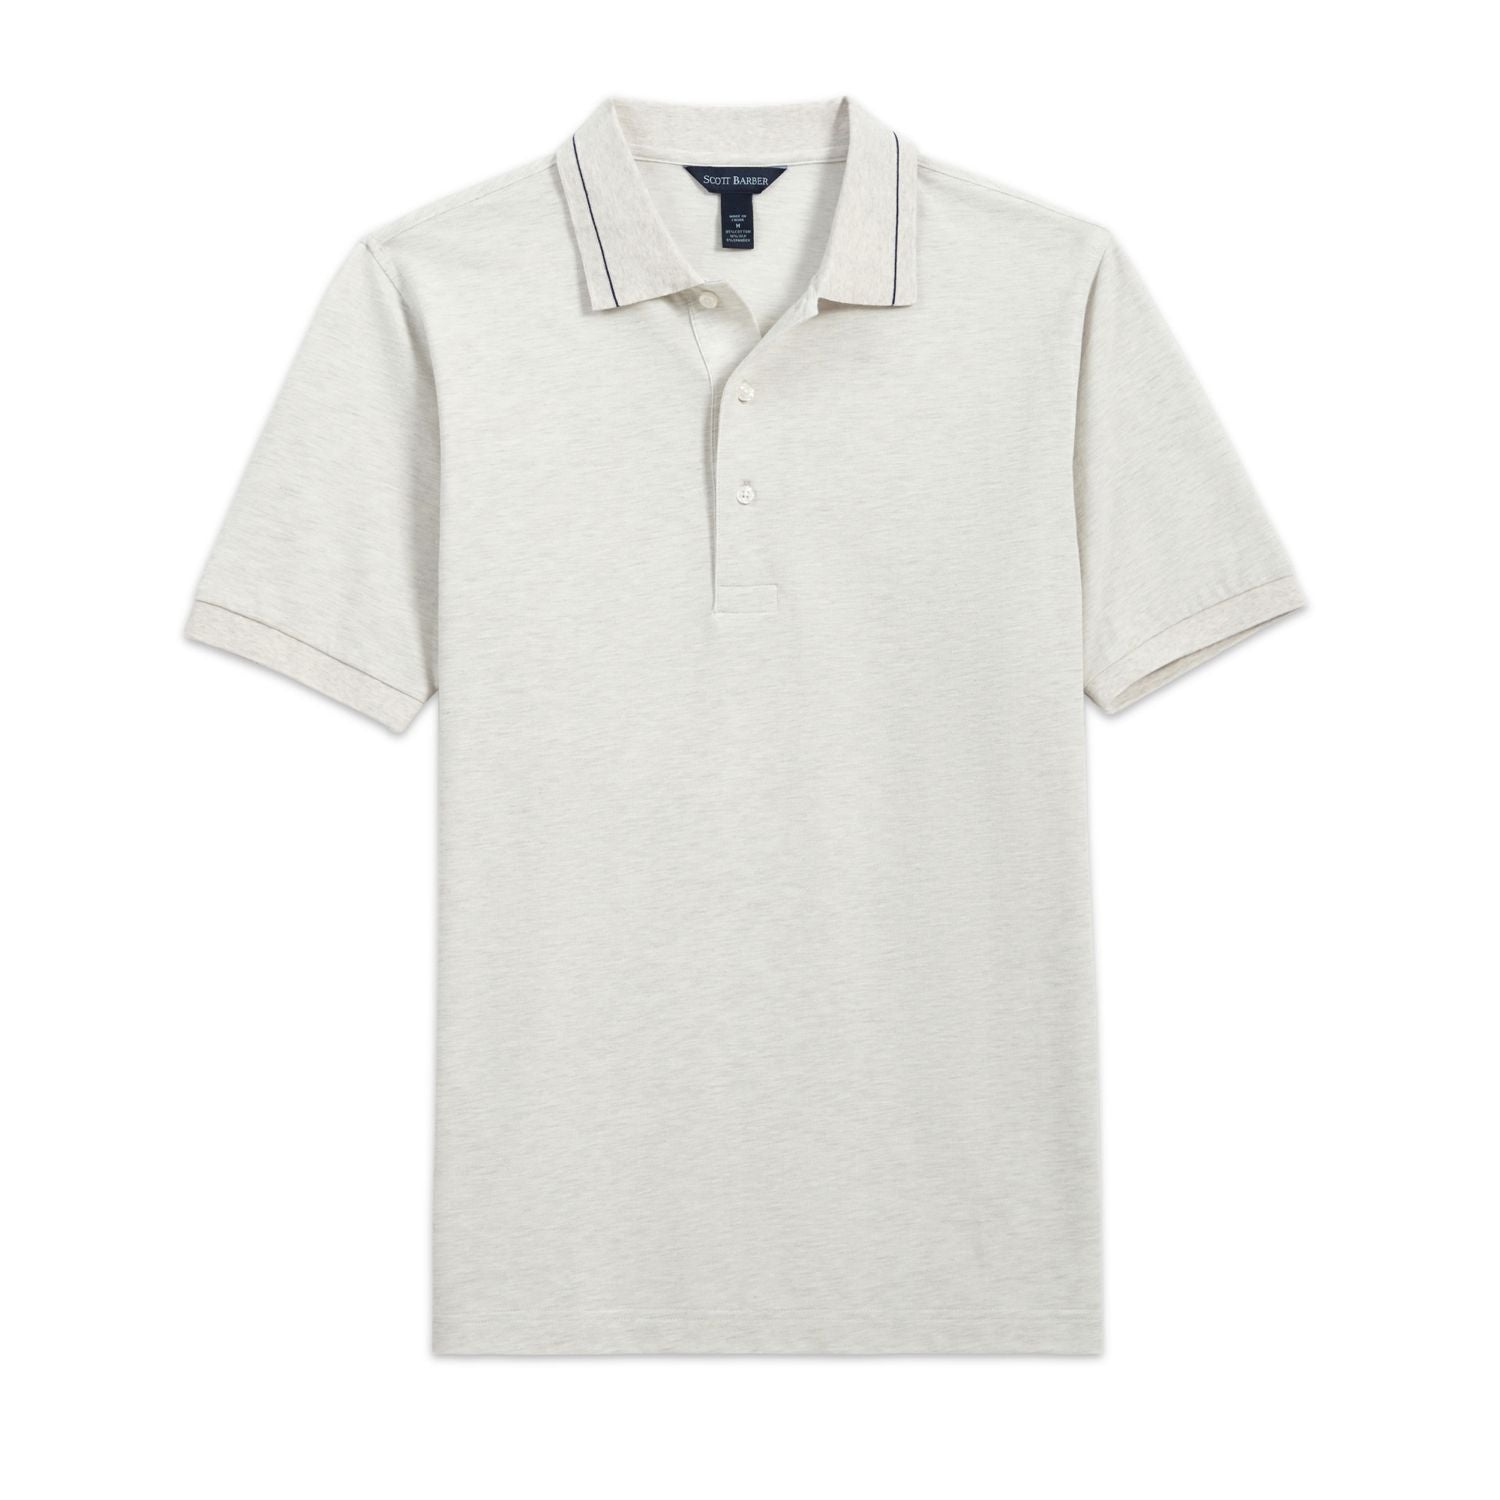 Pima and Silk Pique Short Sleeve Three-Button Polo in White and Grey Heather by Scott Barber